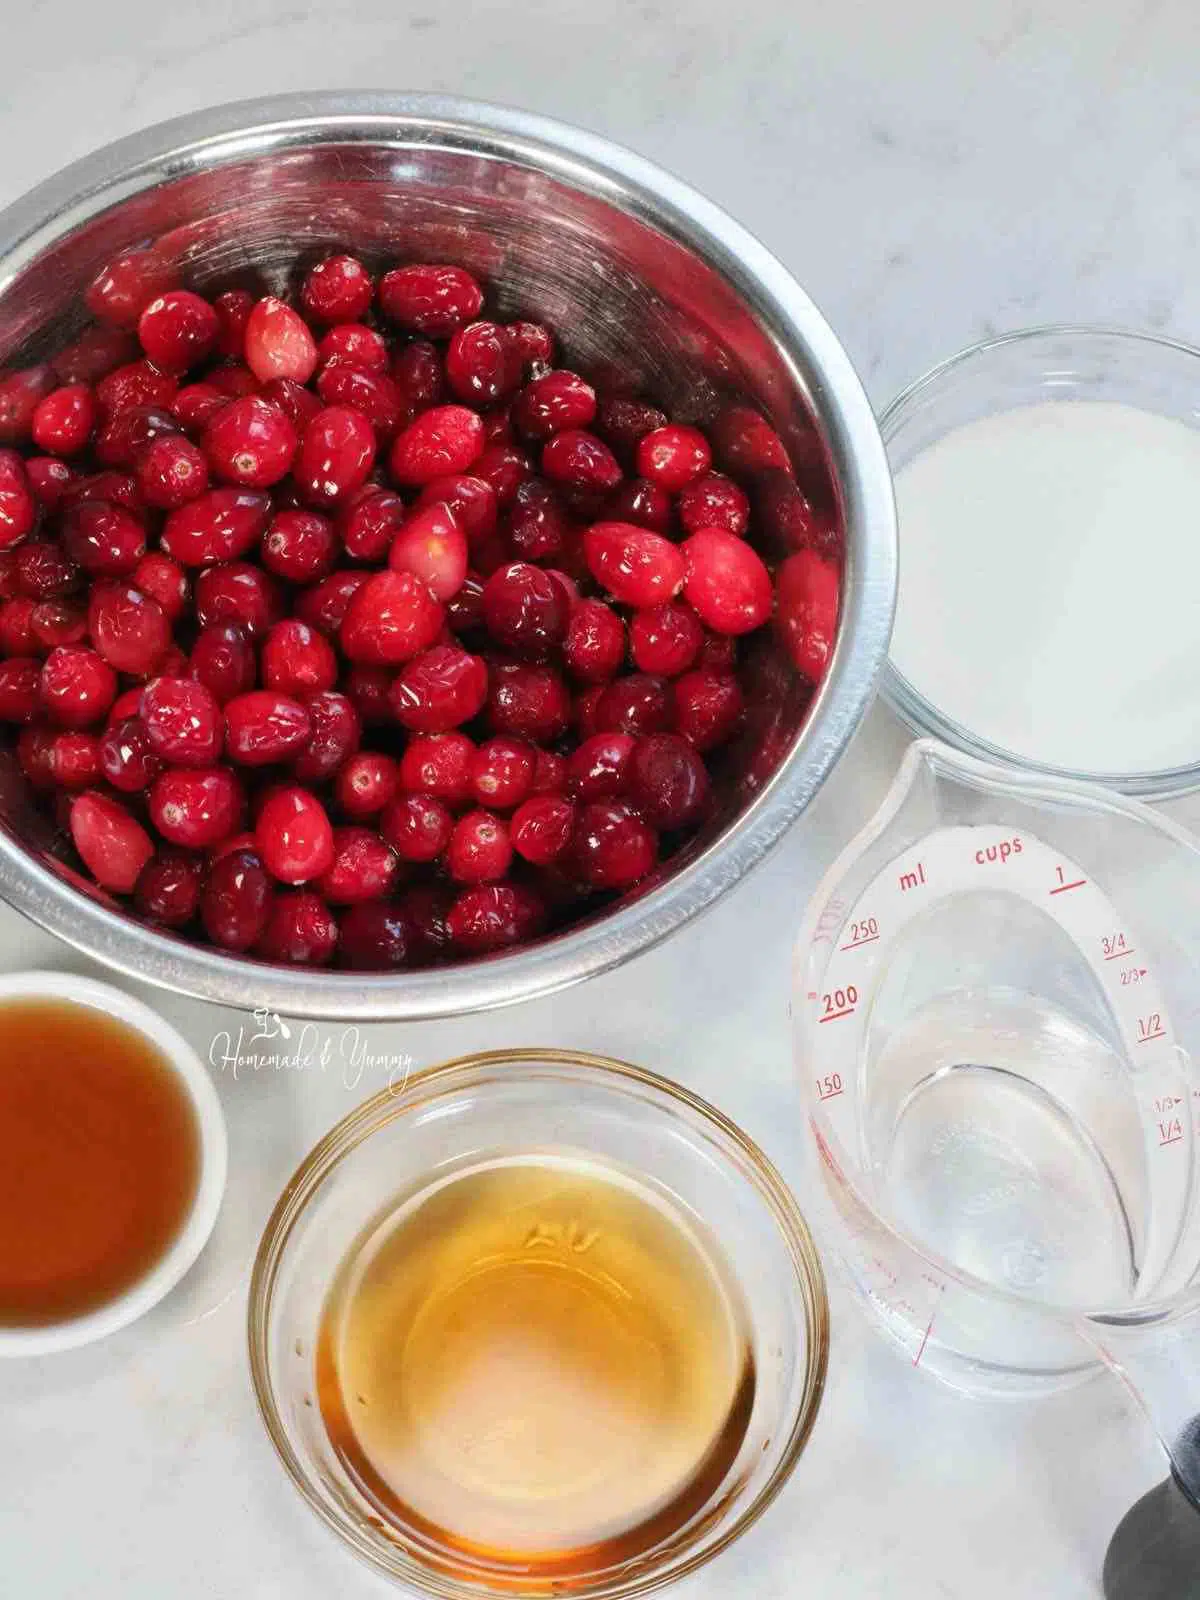 Ingredients to make a holiday cranberry recipe.